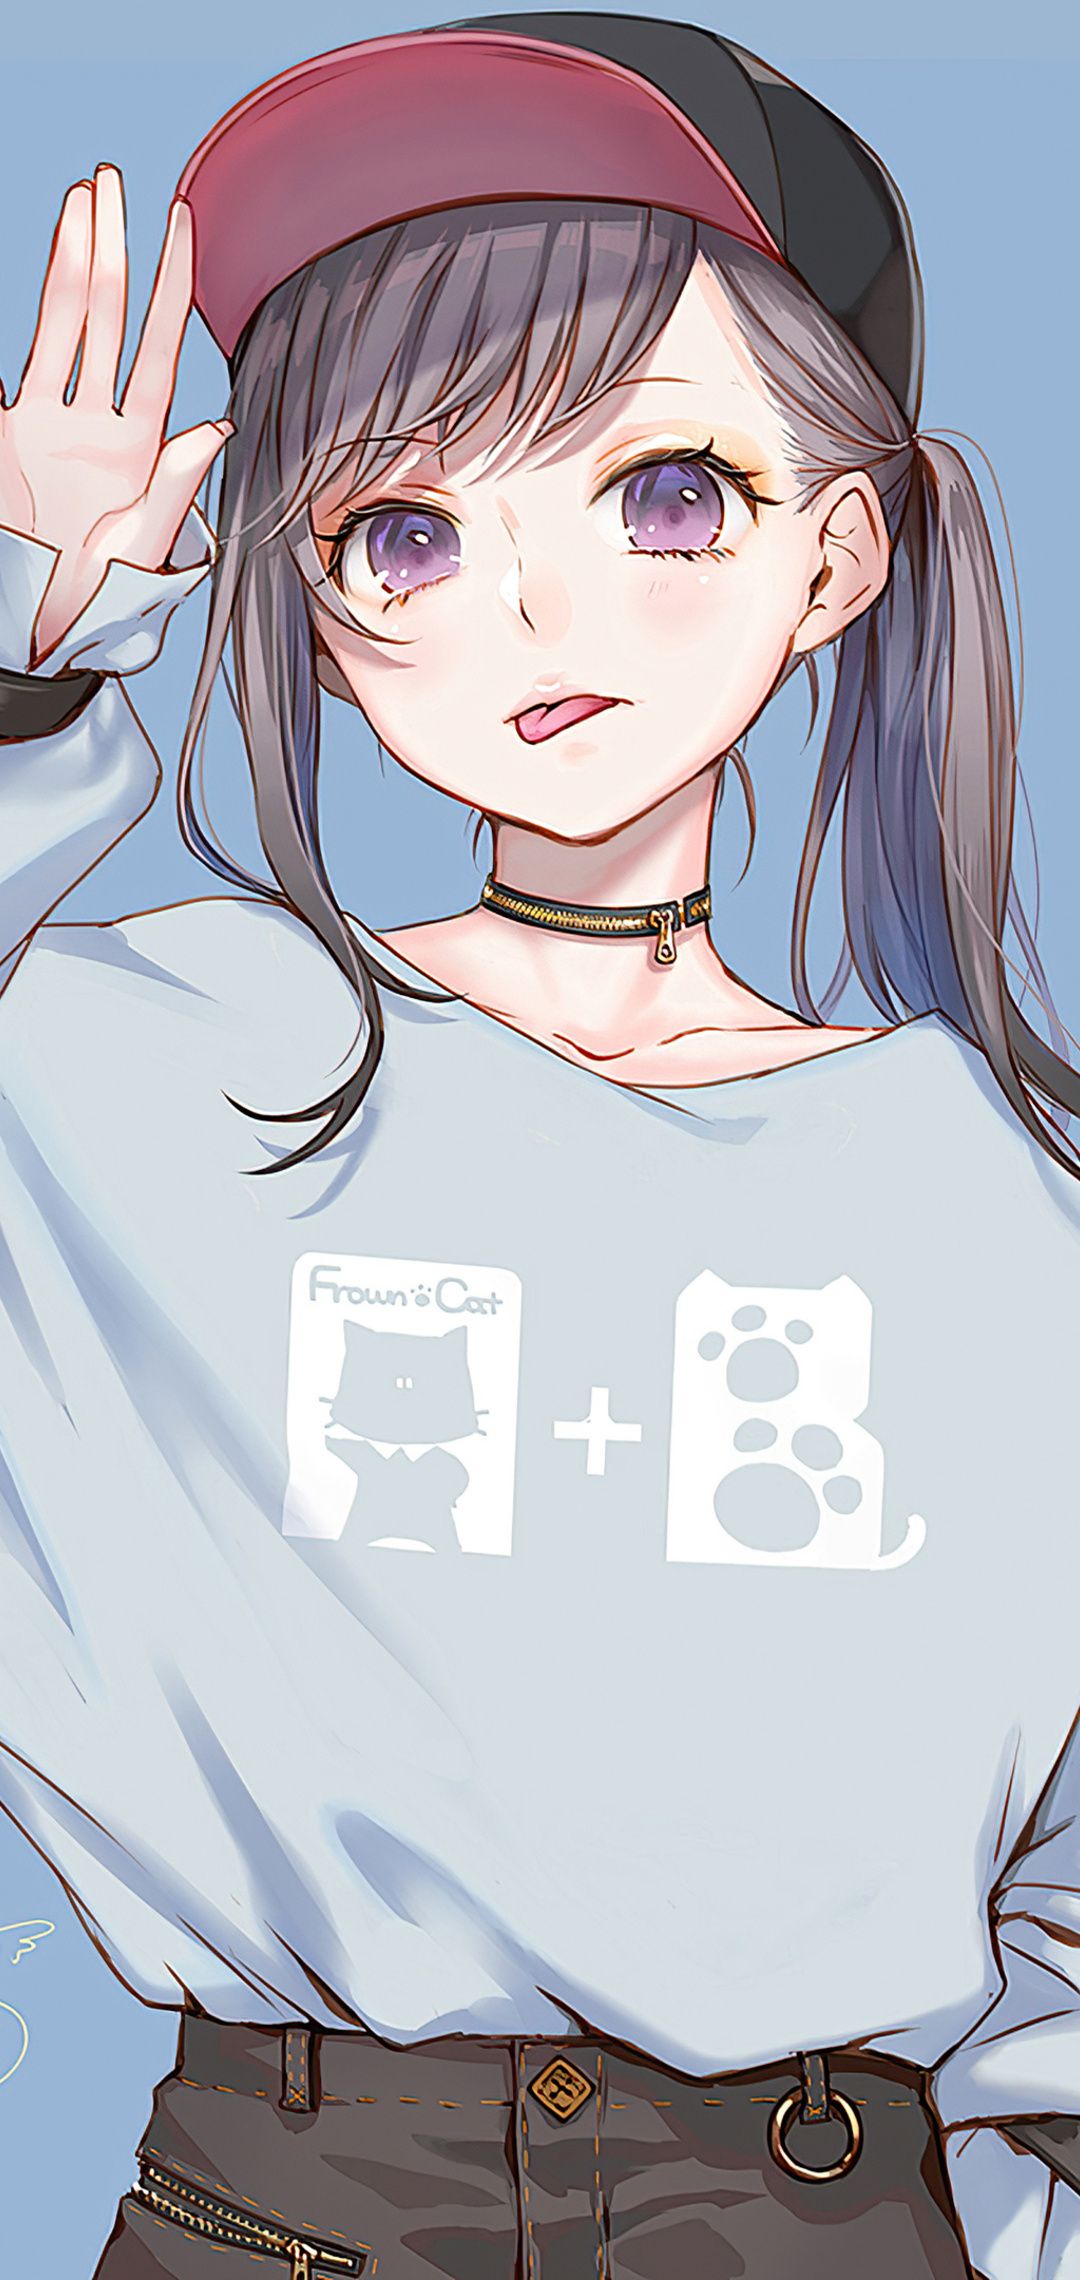 Anime Girl Sweater Hoods 4k One Plus Huawei p Honor view Vivo y Oppo f Xiaomi Mi A2 HD 4k Wallpaper, Image, Background, Photo and Picture